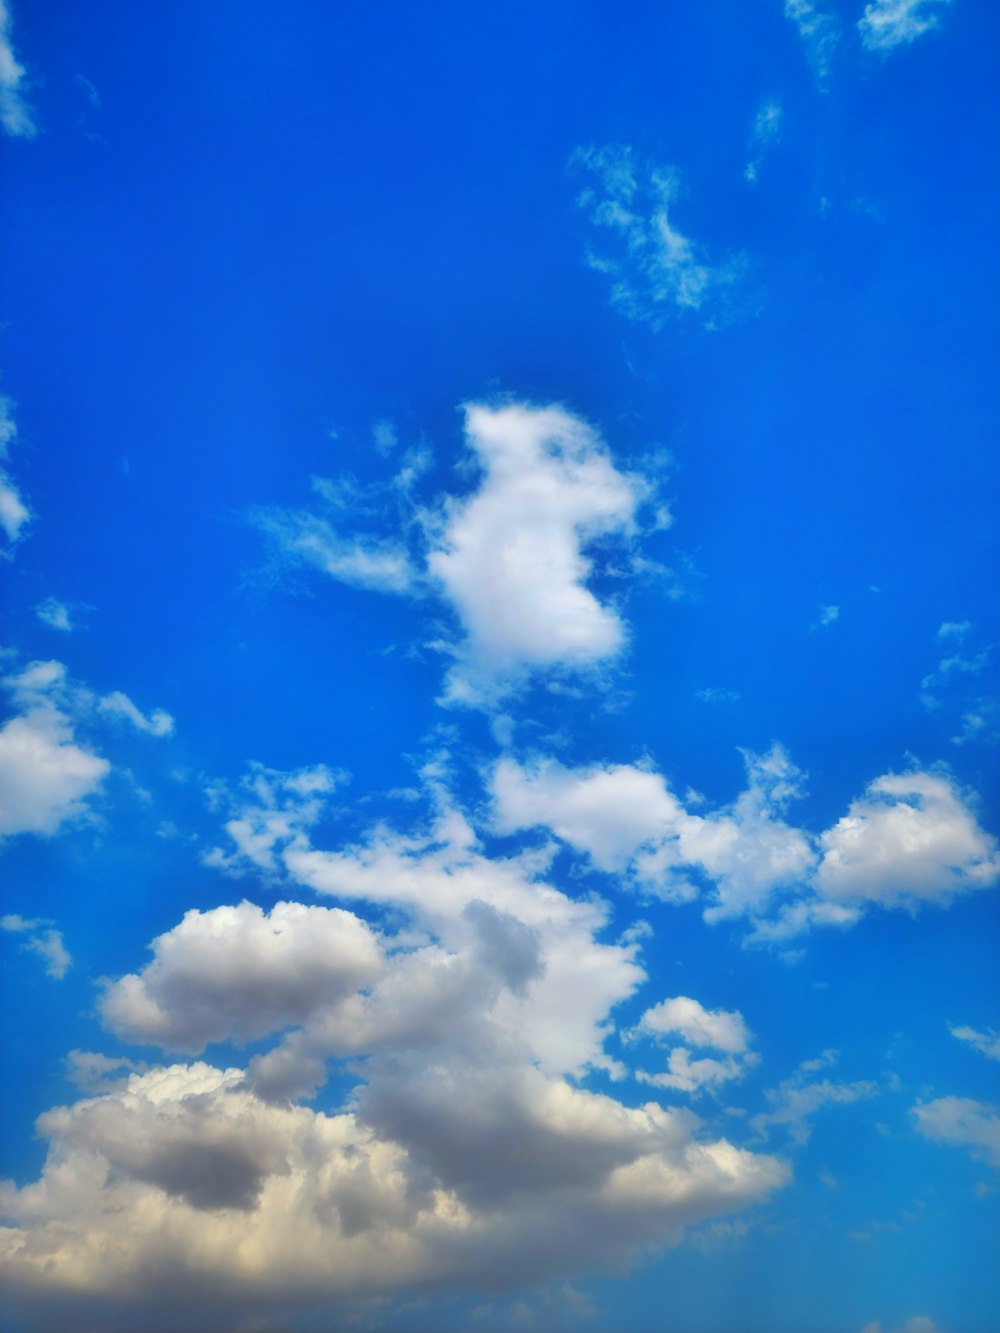 a blue sky with white clouds and a plane in the foreground